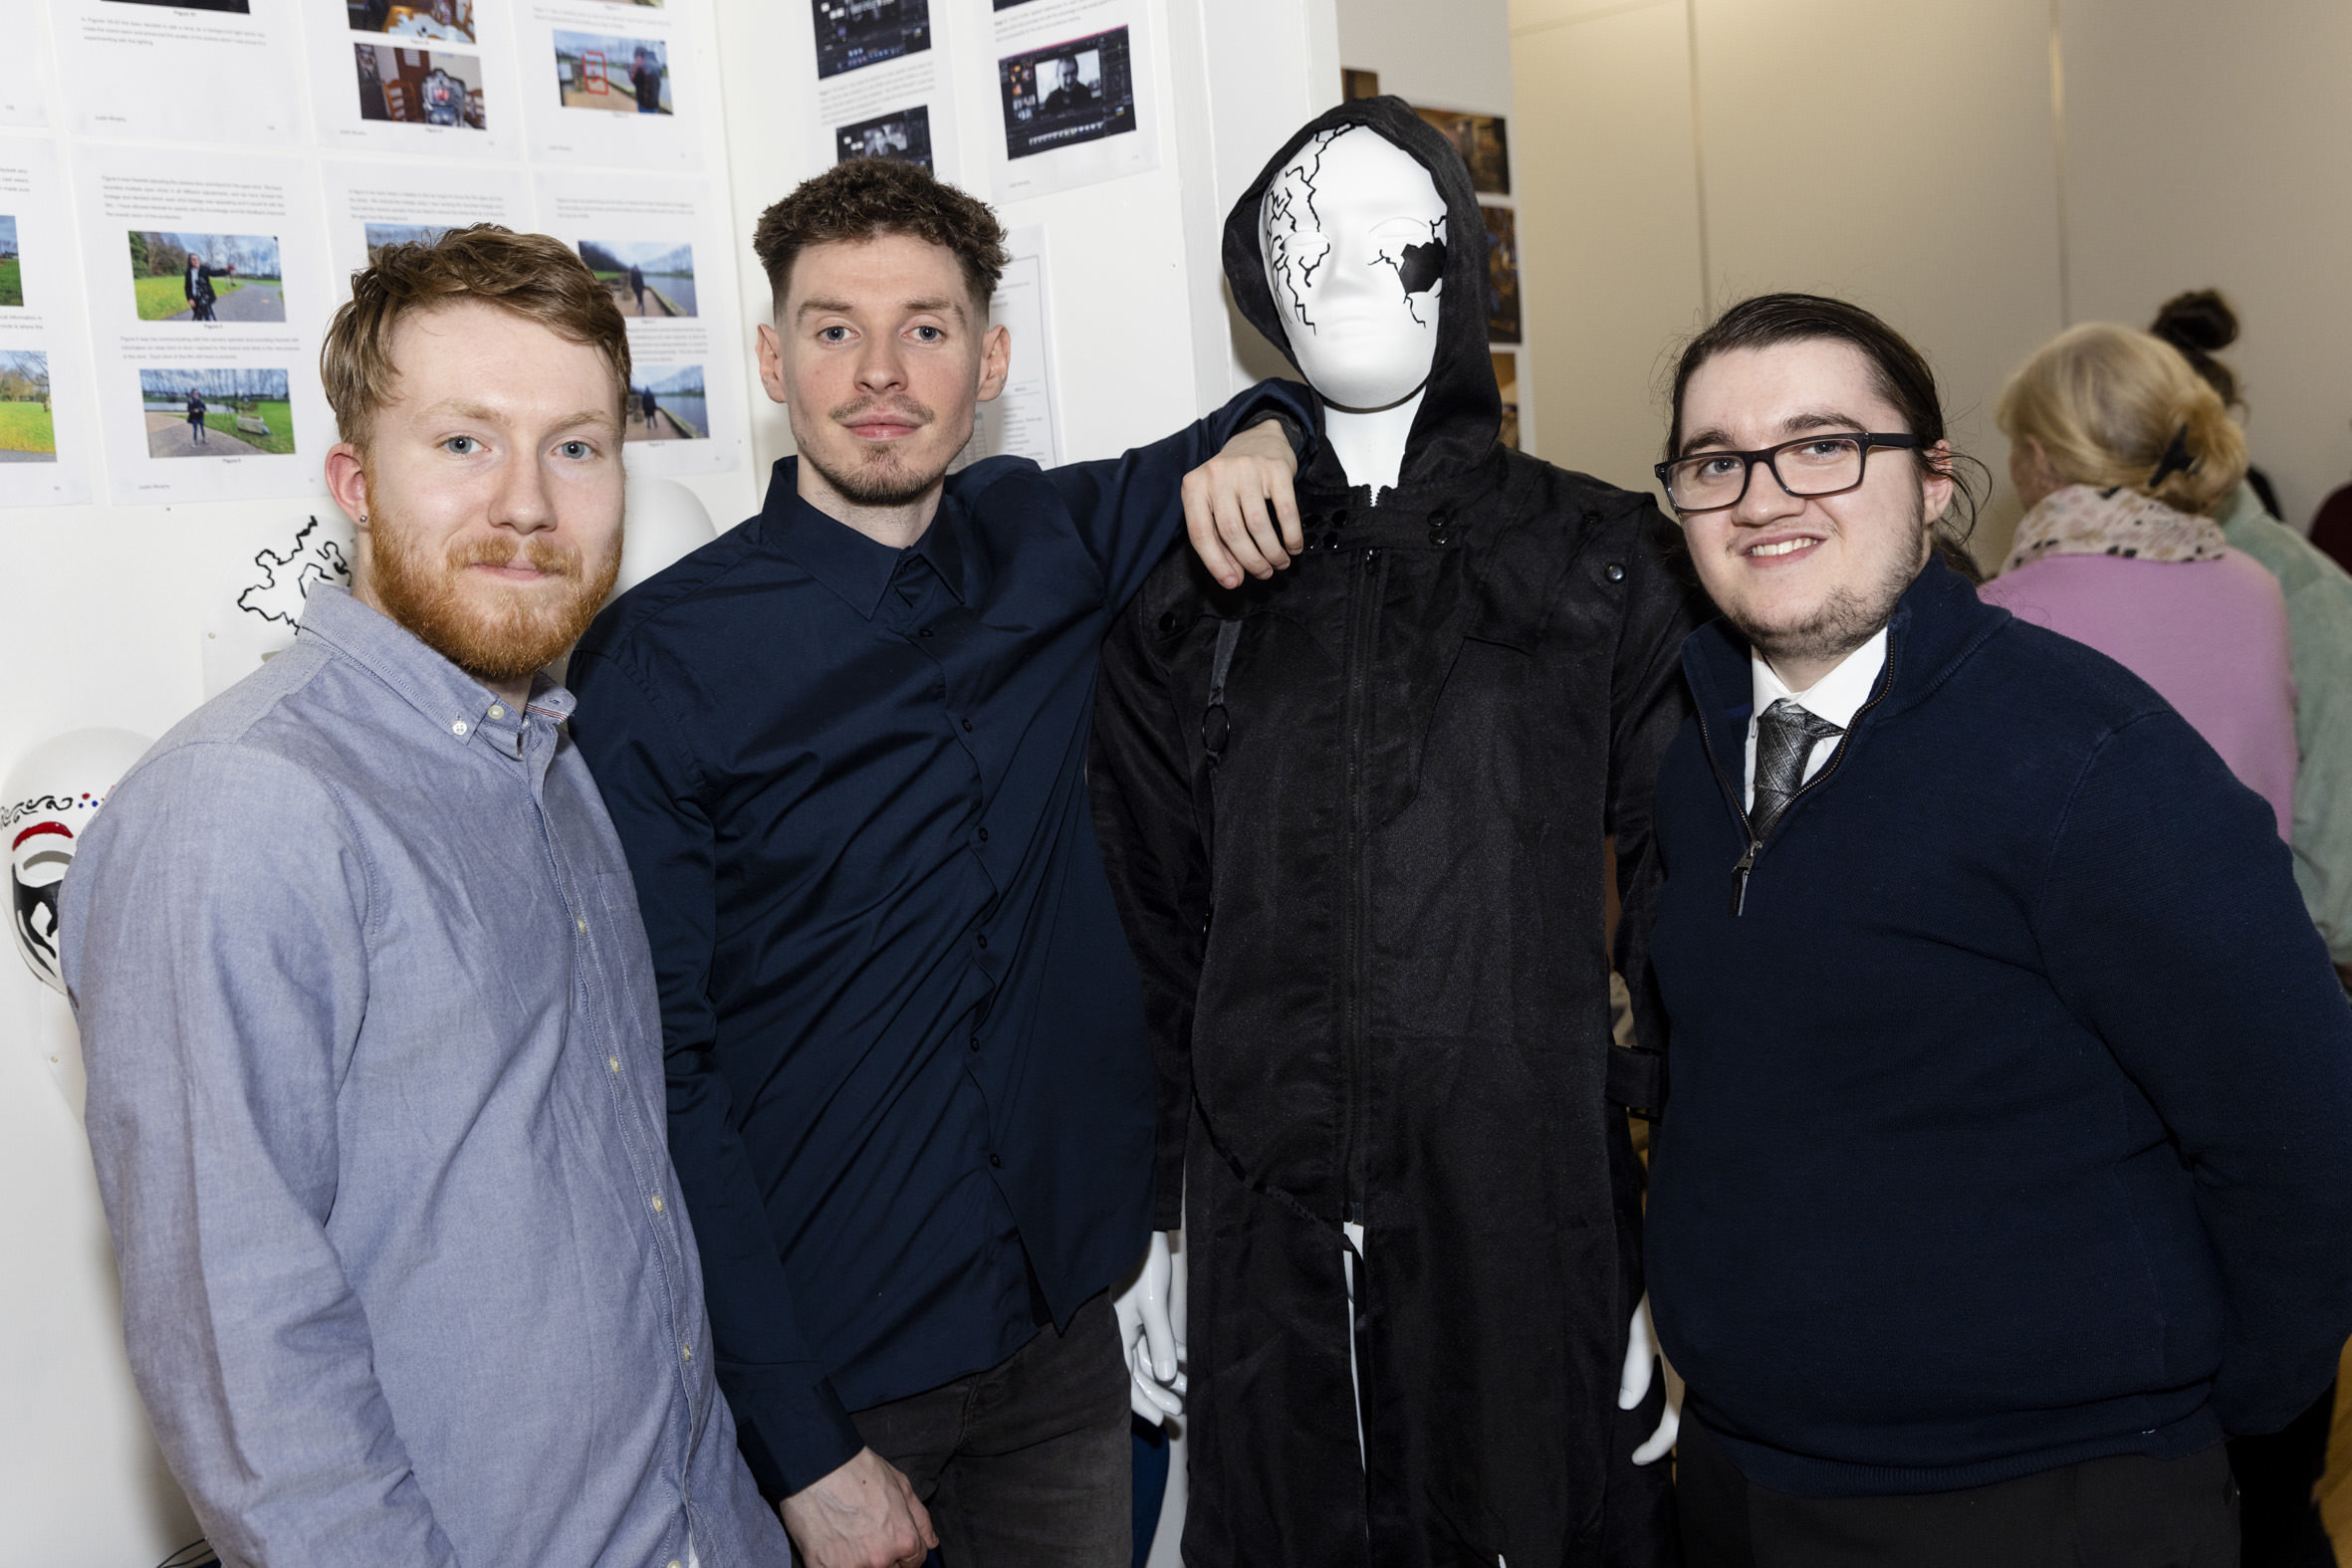 SWC creative media students showcase work at exhibition